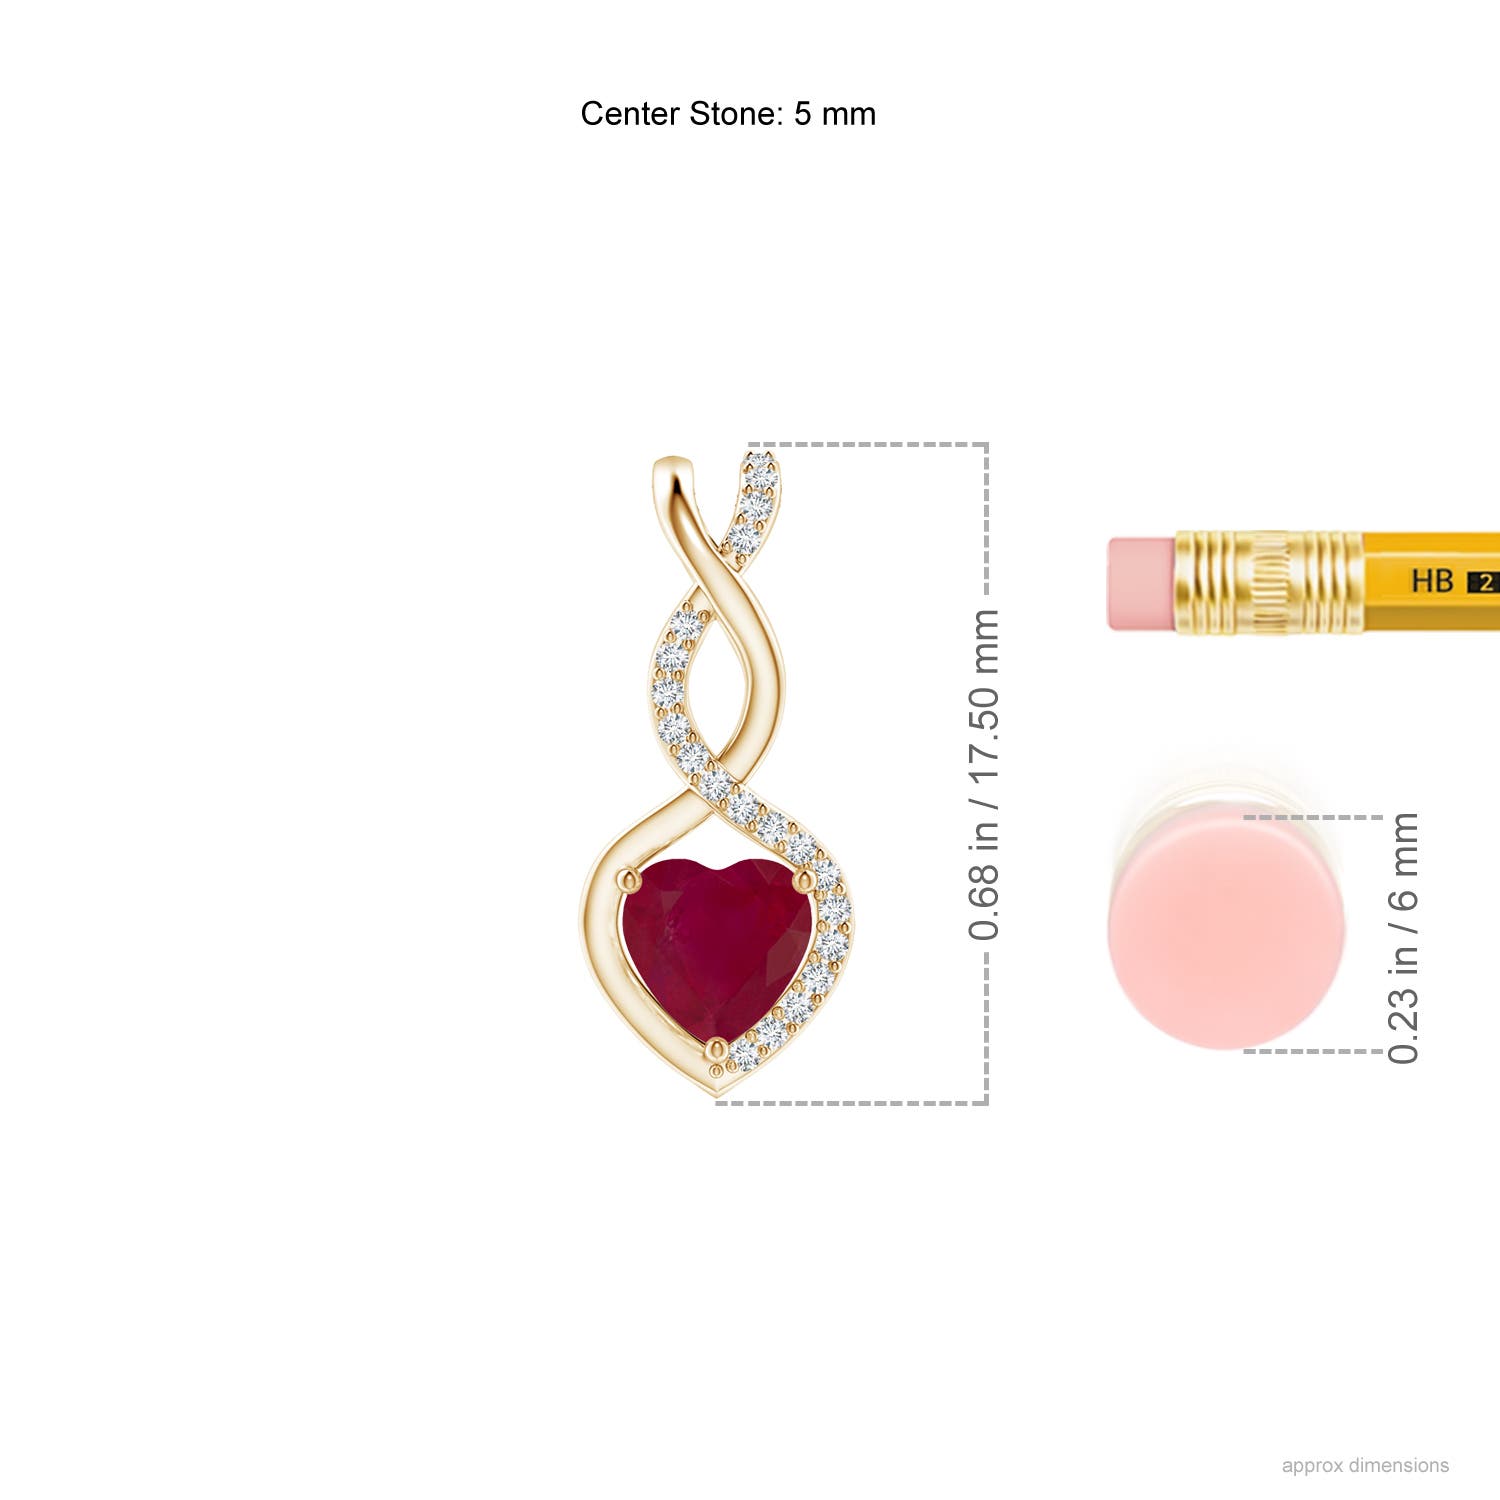 A - Ruby / 0.61 CT / 14 KT Yellow Gold